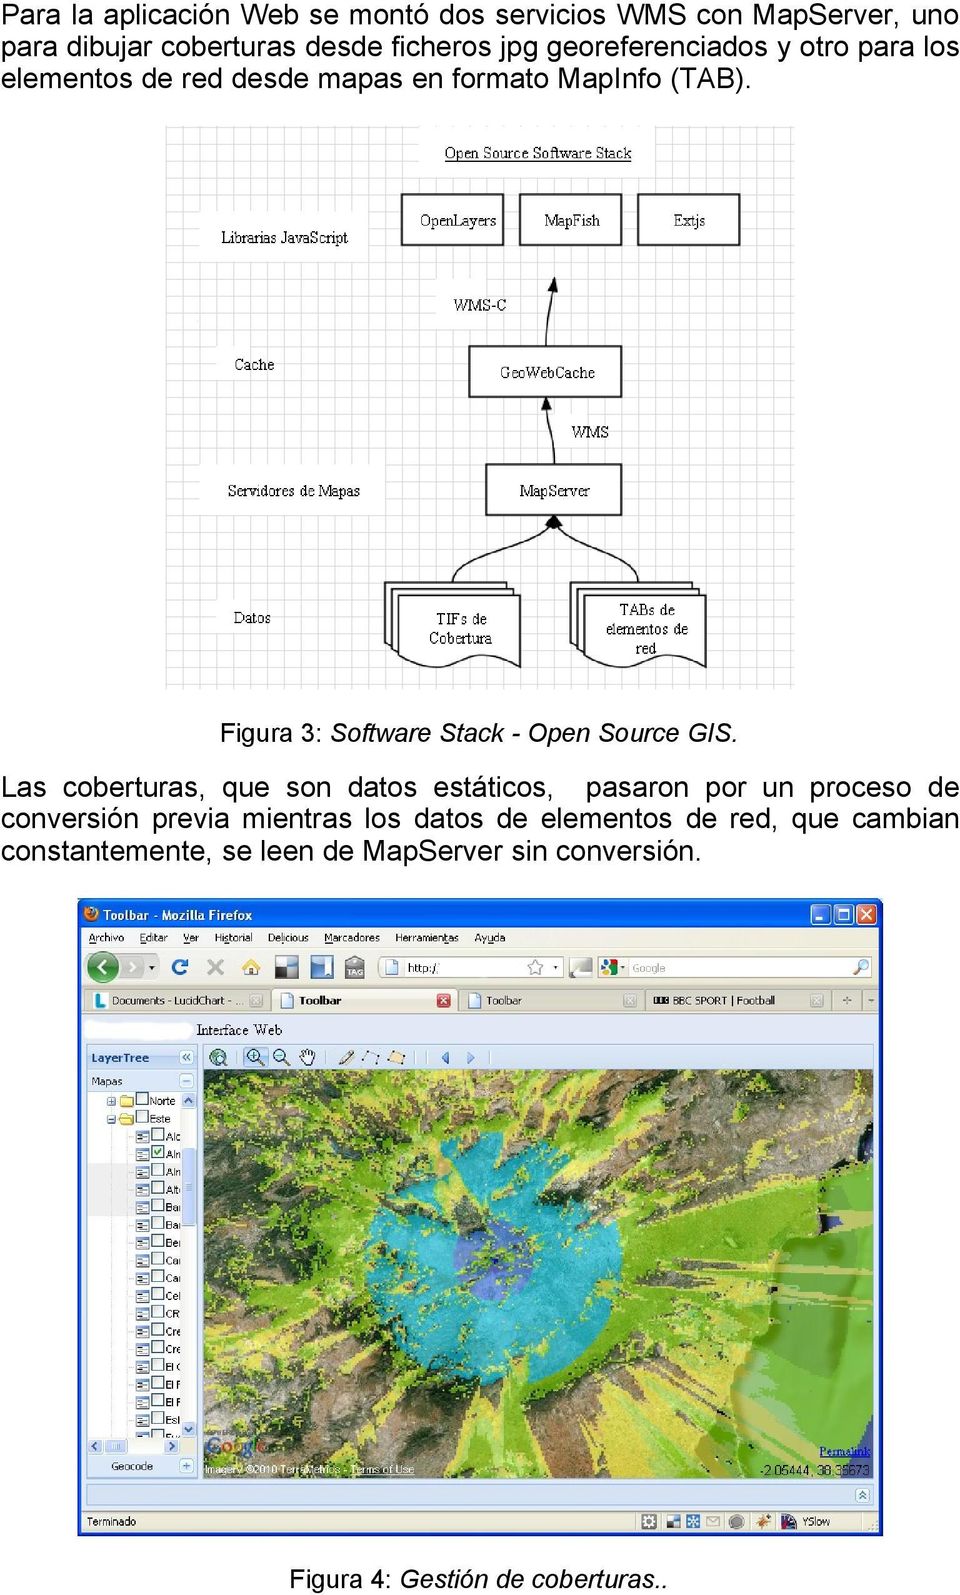 Figura 3: Software Stack - Open Source GIS.